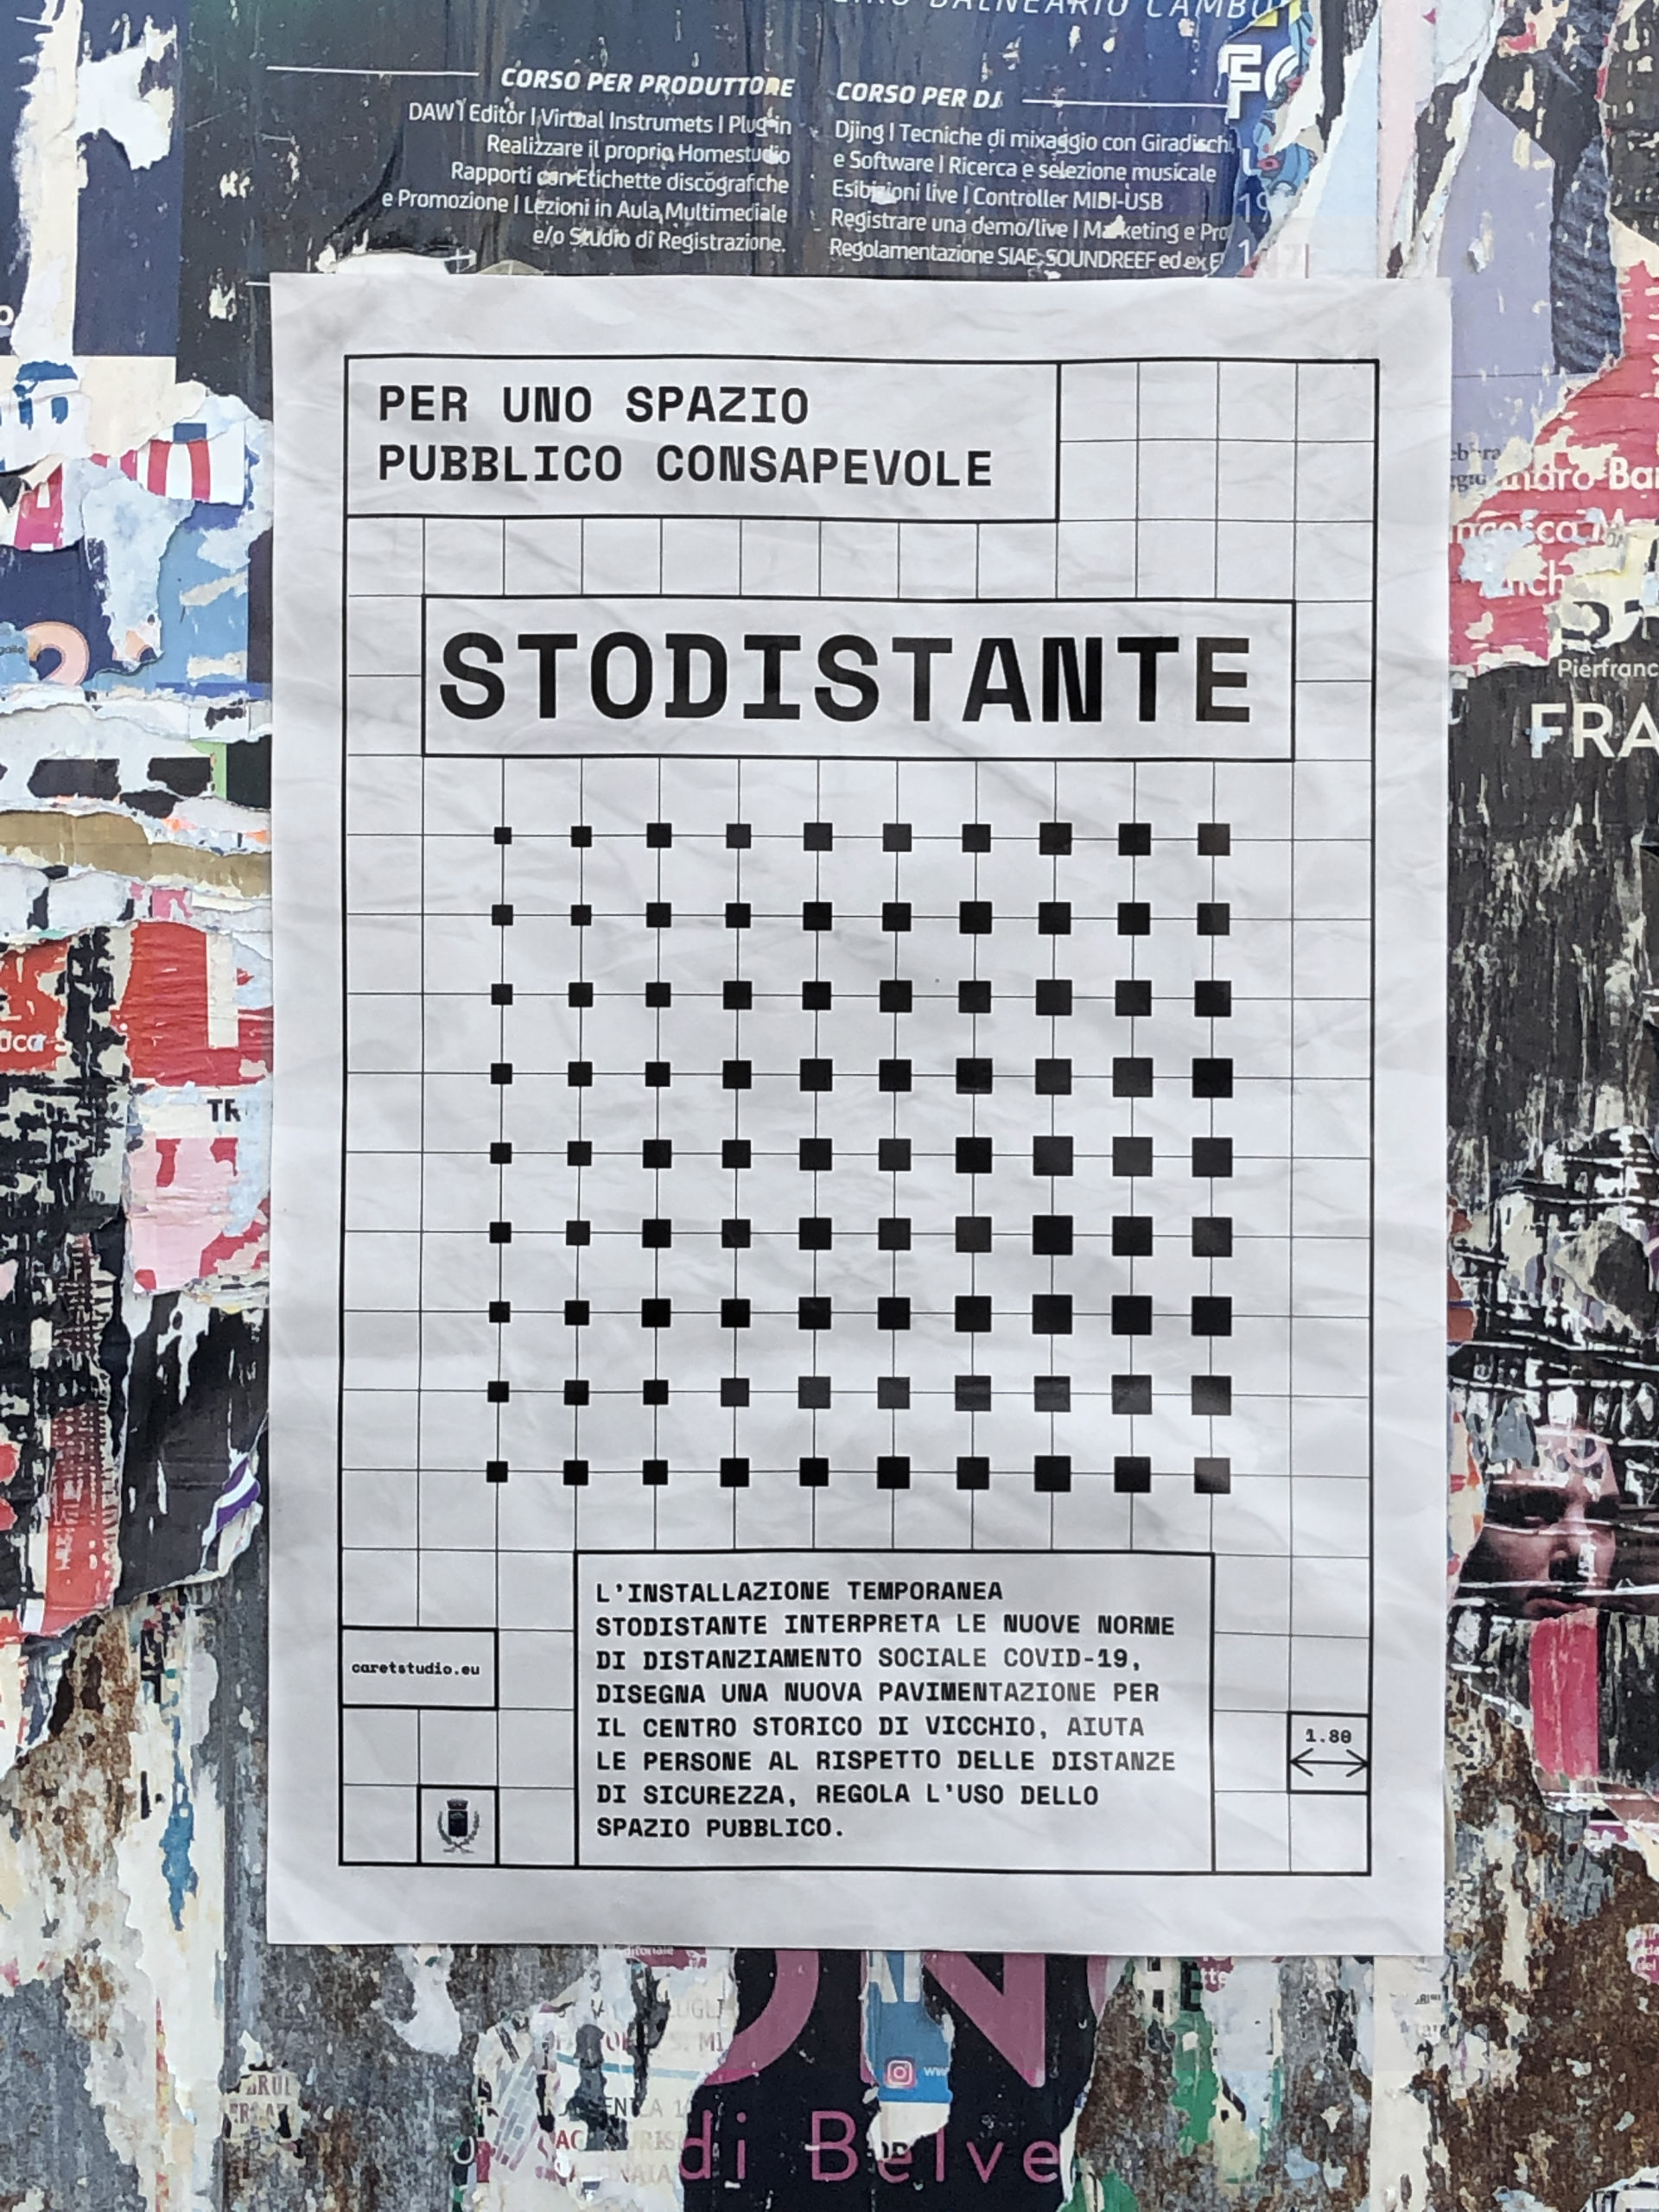 White paper poster advertising an art installation for social distancing using black squares in a 9 x 8 grid, each square in each row gets larger from left to right